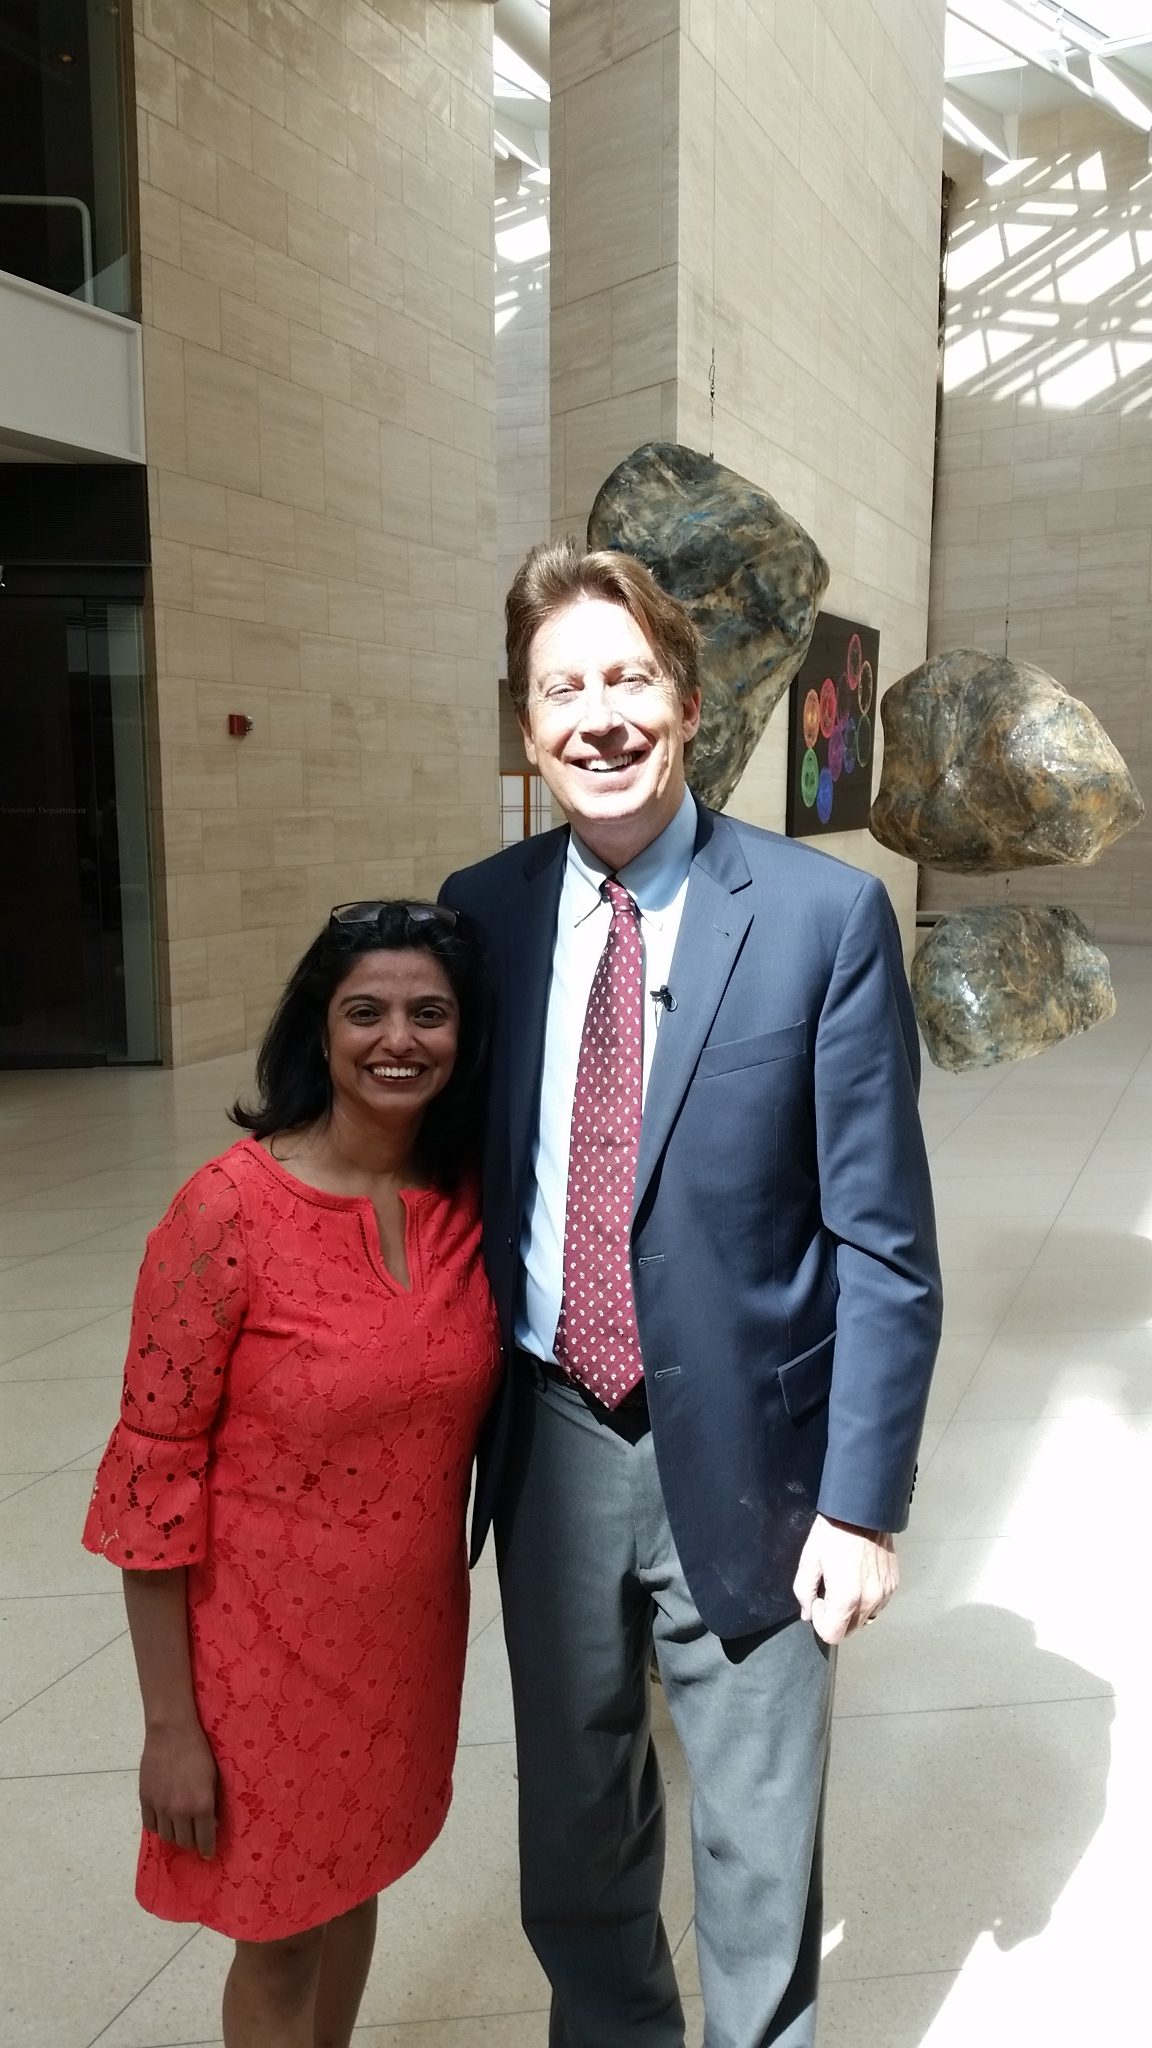 Dr. Bredesen and Aarti Batavia at a conference